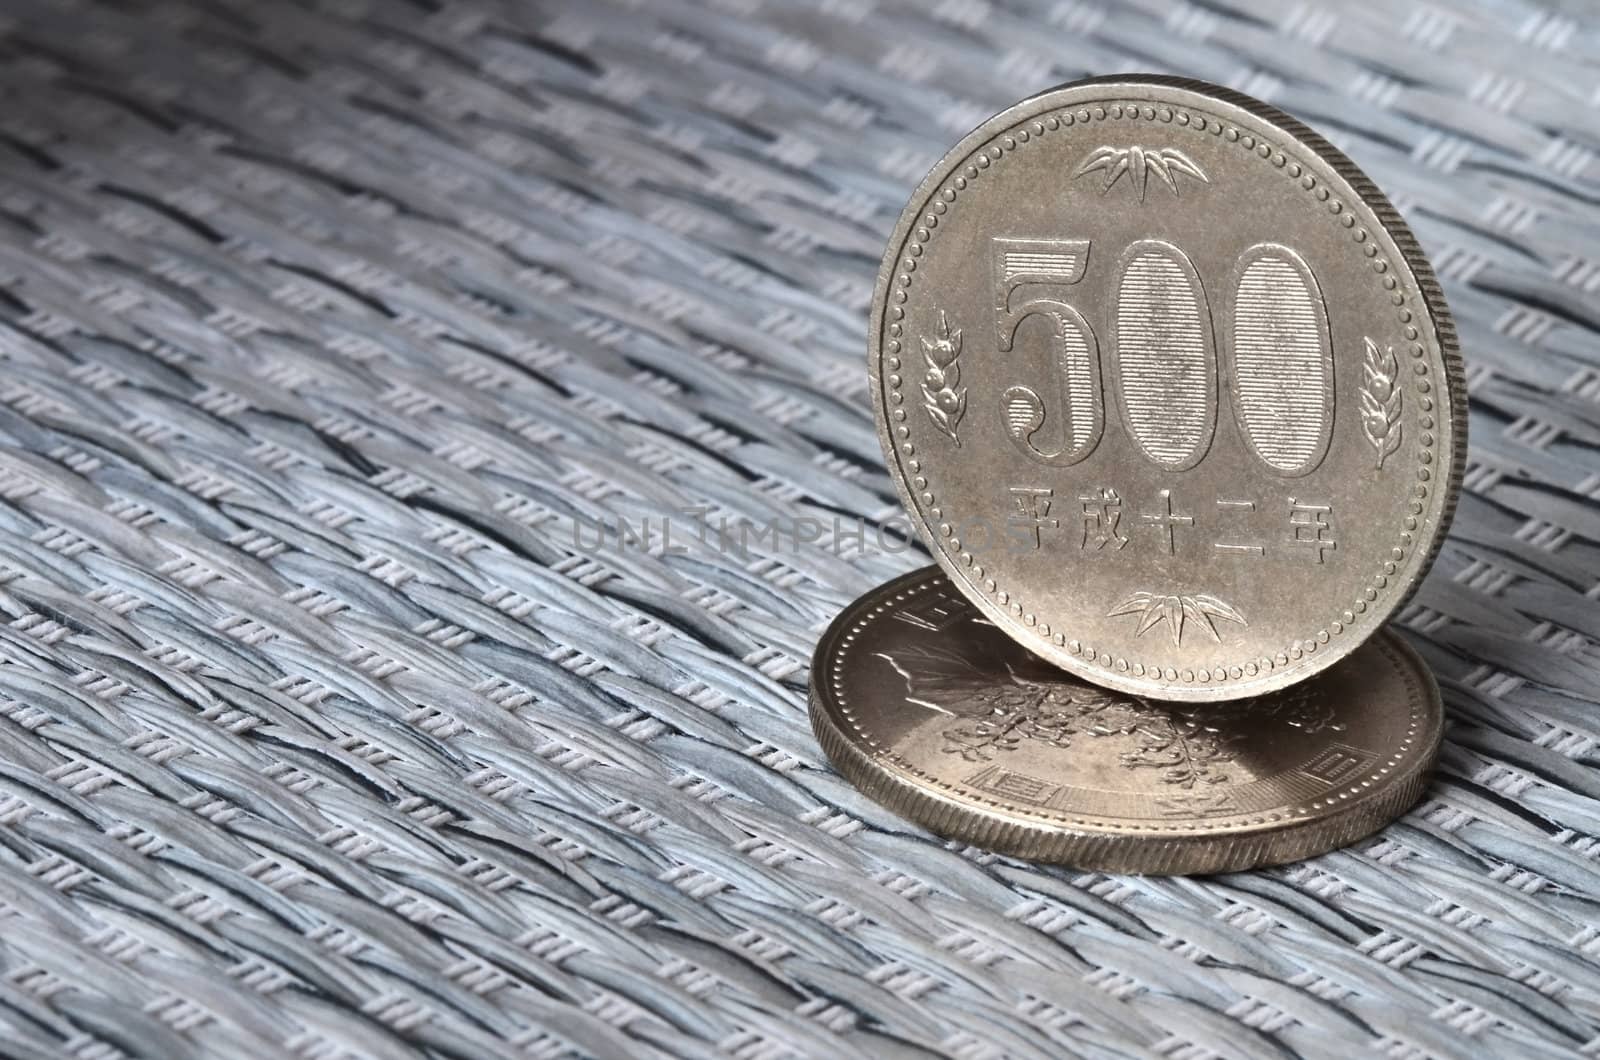 Japanese currency coins by Vectorex